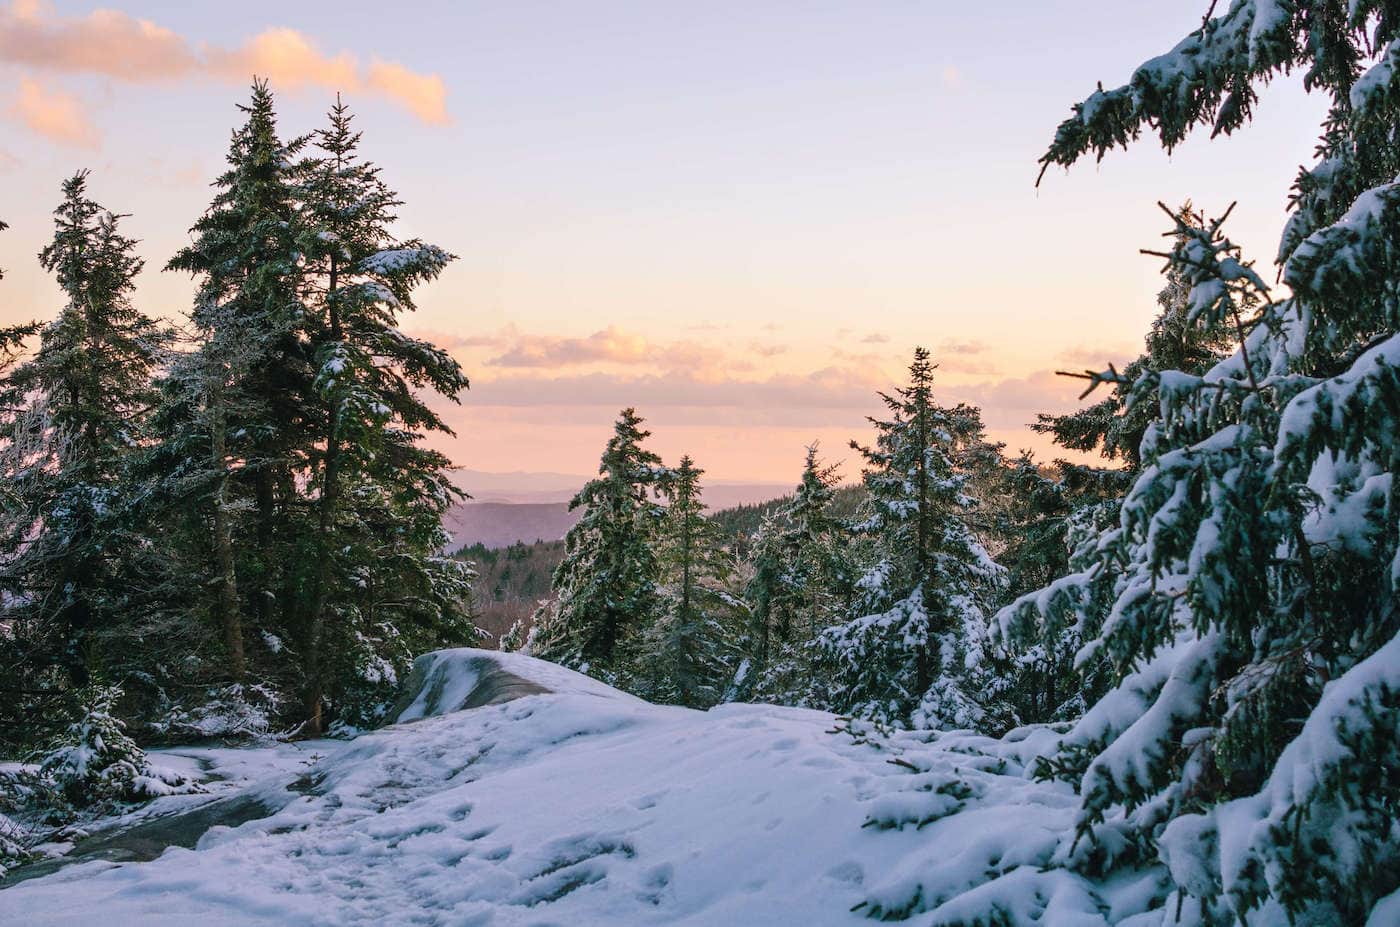 Looking for a winter hike in New Hampshire? This trail guide to hiking South Mount Mountain in the winter covers what to expect and more.